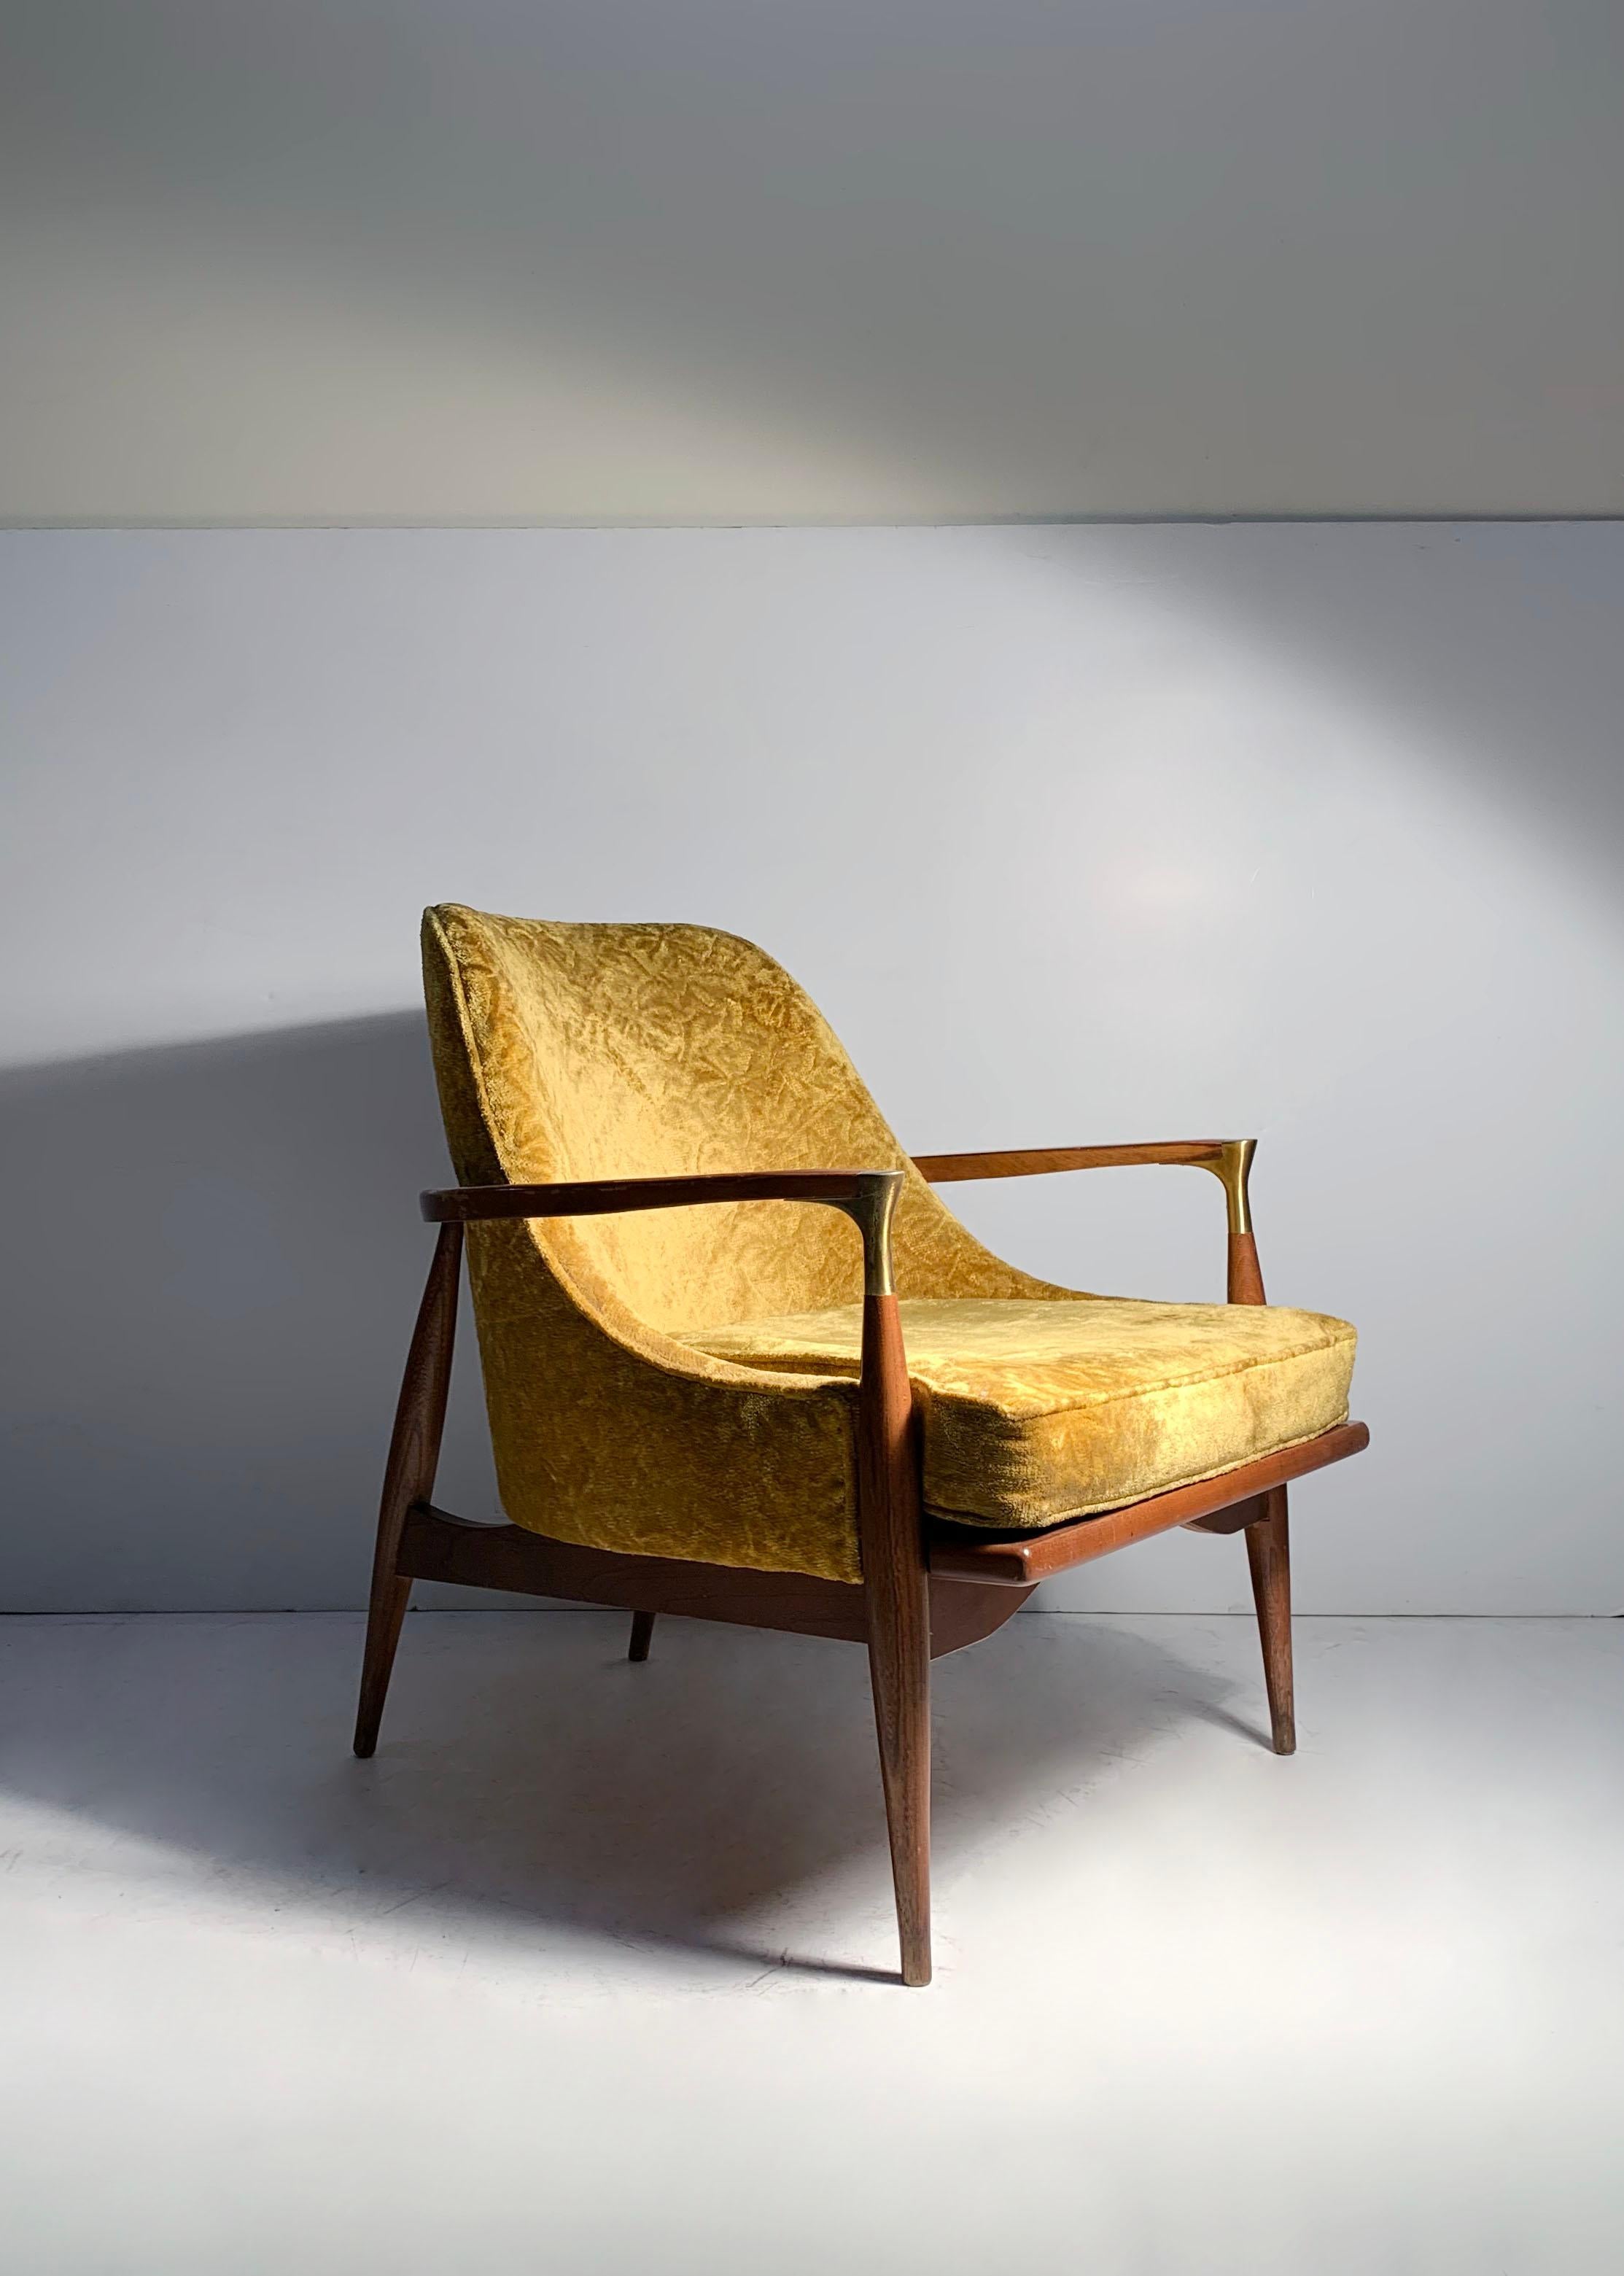 Attractive teardrop seat sitting in a architectural wood frame construction. Brass arm cap detail very nice. Designer and Manufacturer is unknown. Has Danish modern influence. In the manner of Kofod Larsen. Possibly Dan Johnson. Fairly certain these